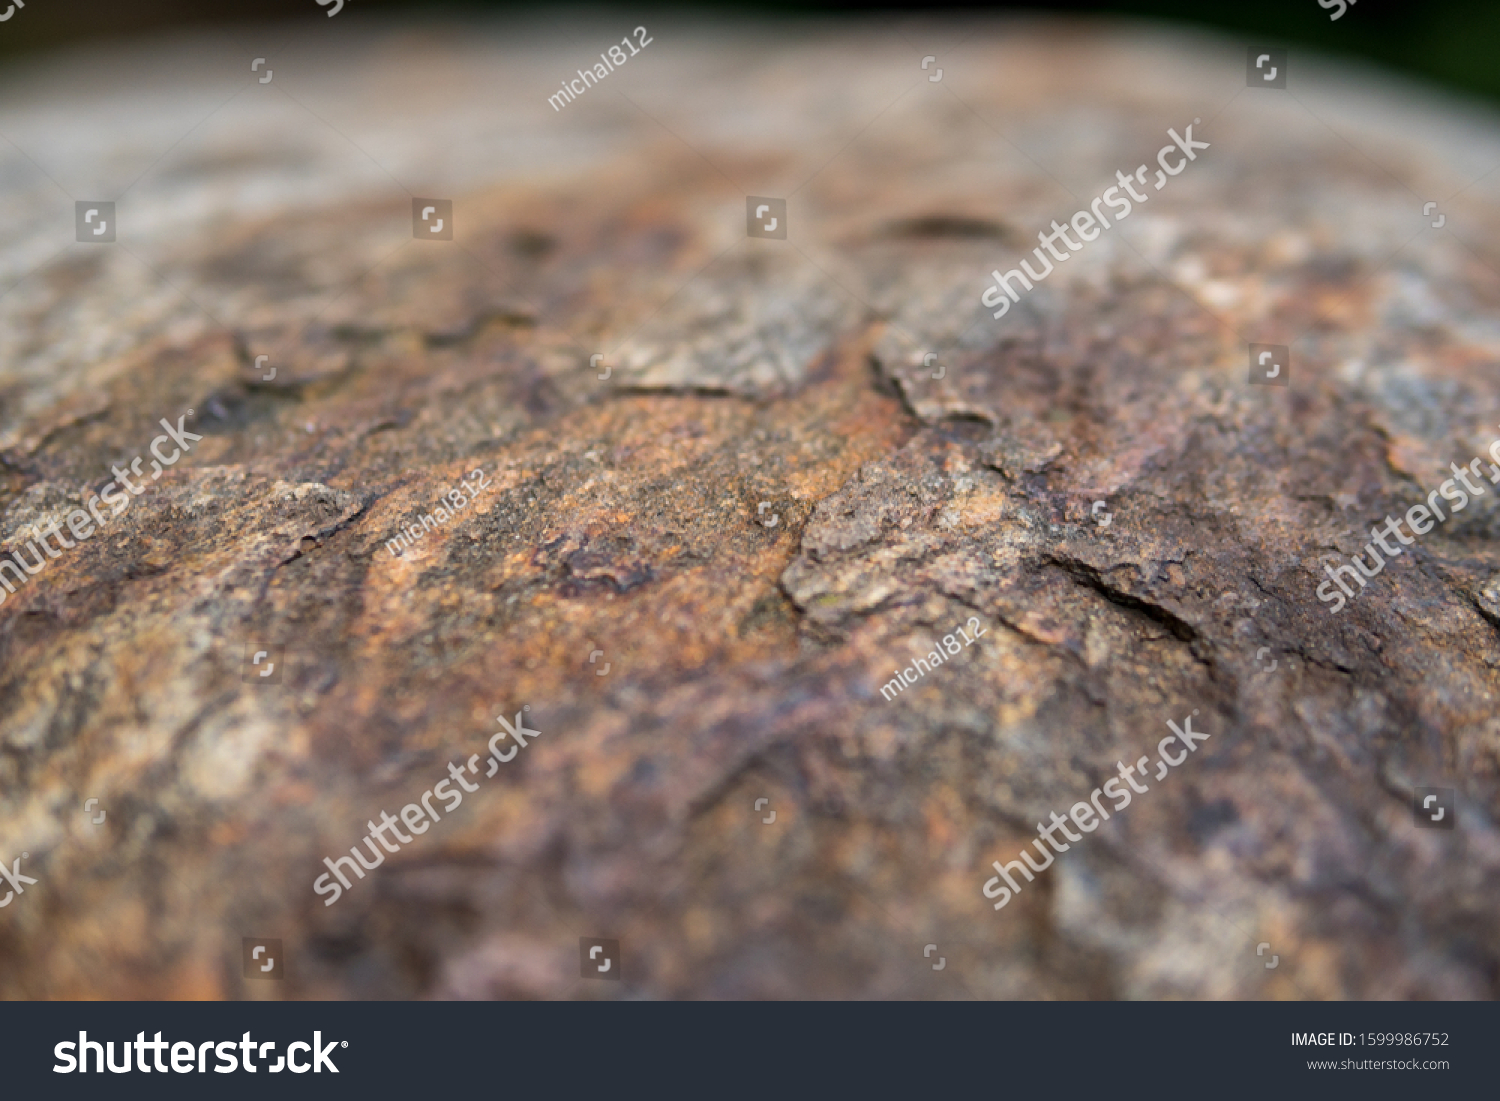 detail of a rock with effect of thermal stress weathering and visible layers peeled away by exfoliation #1599986752